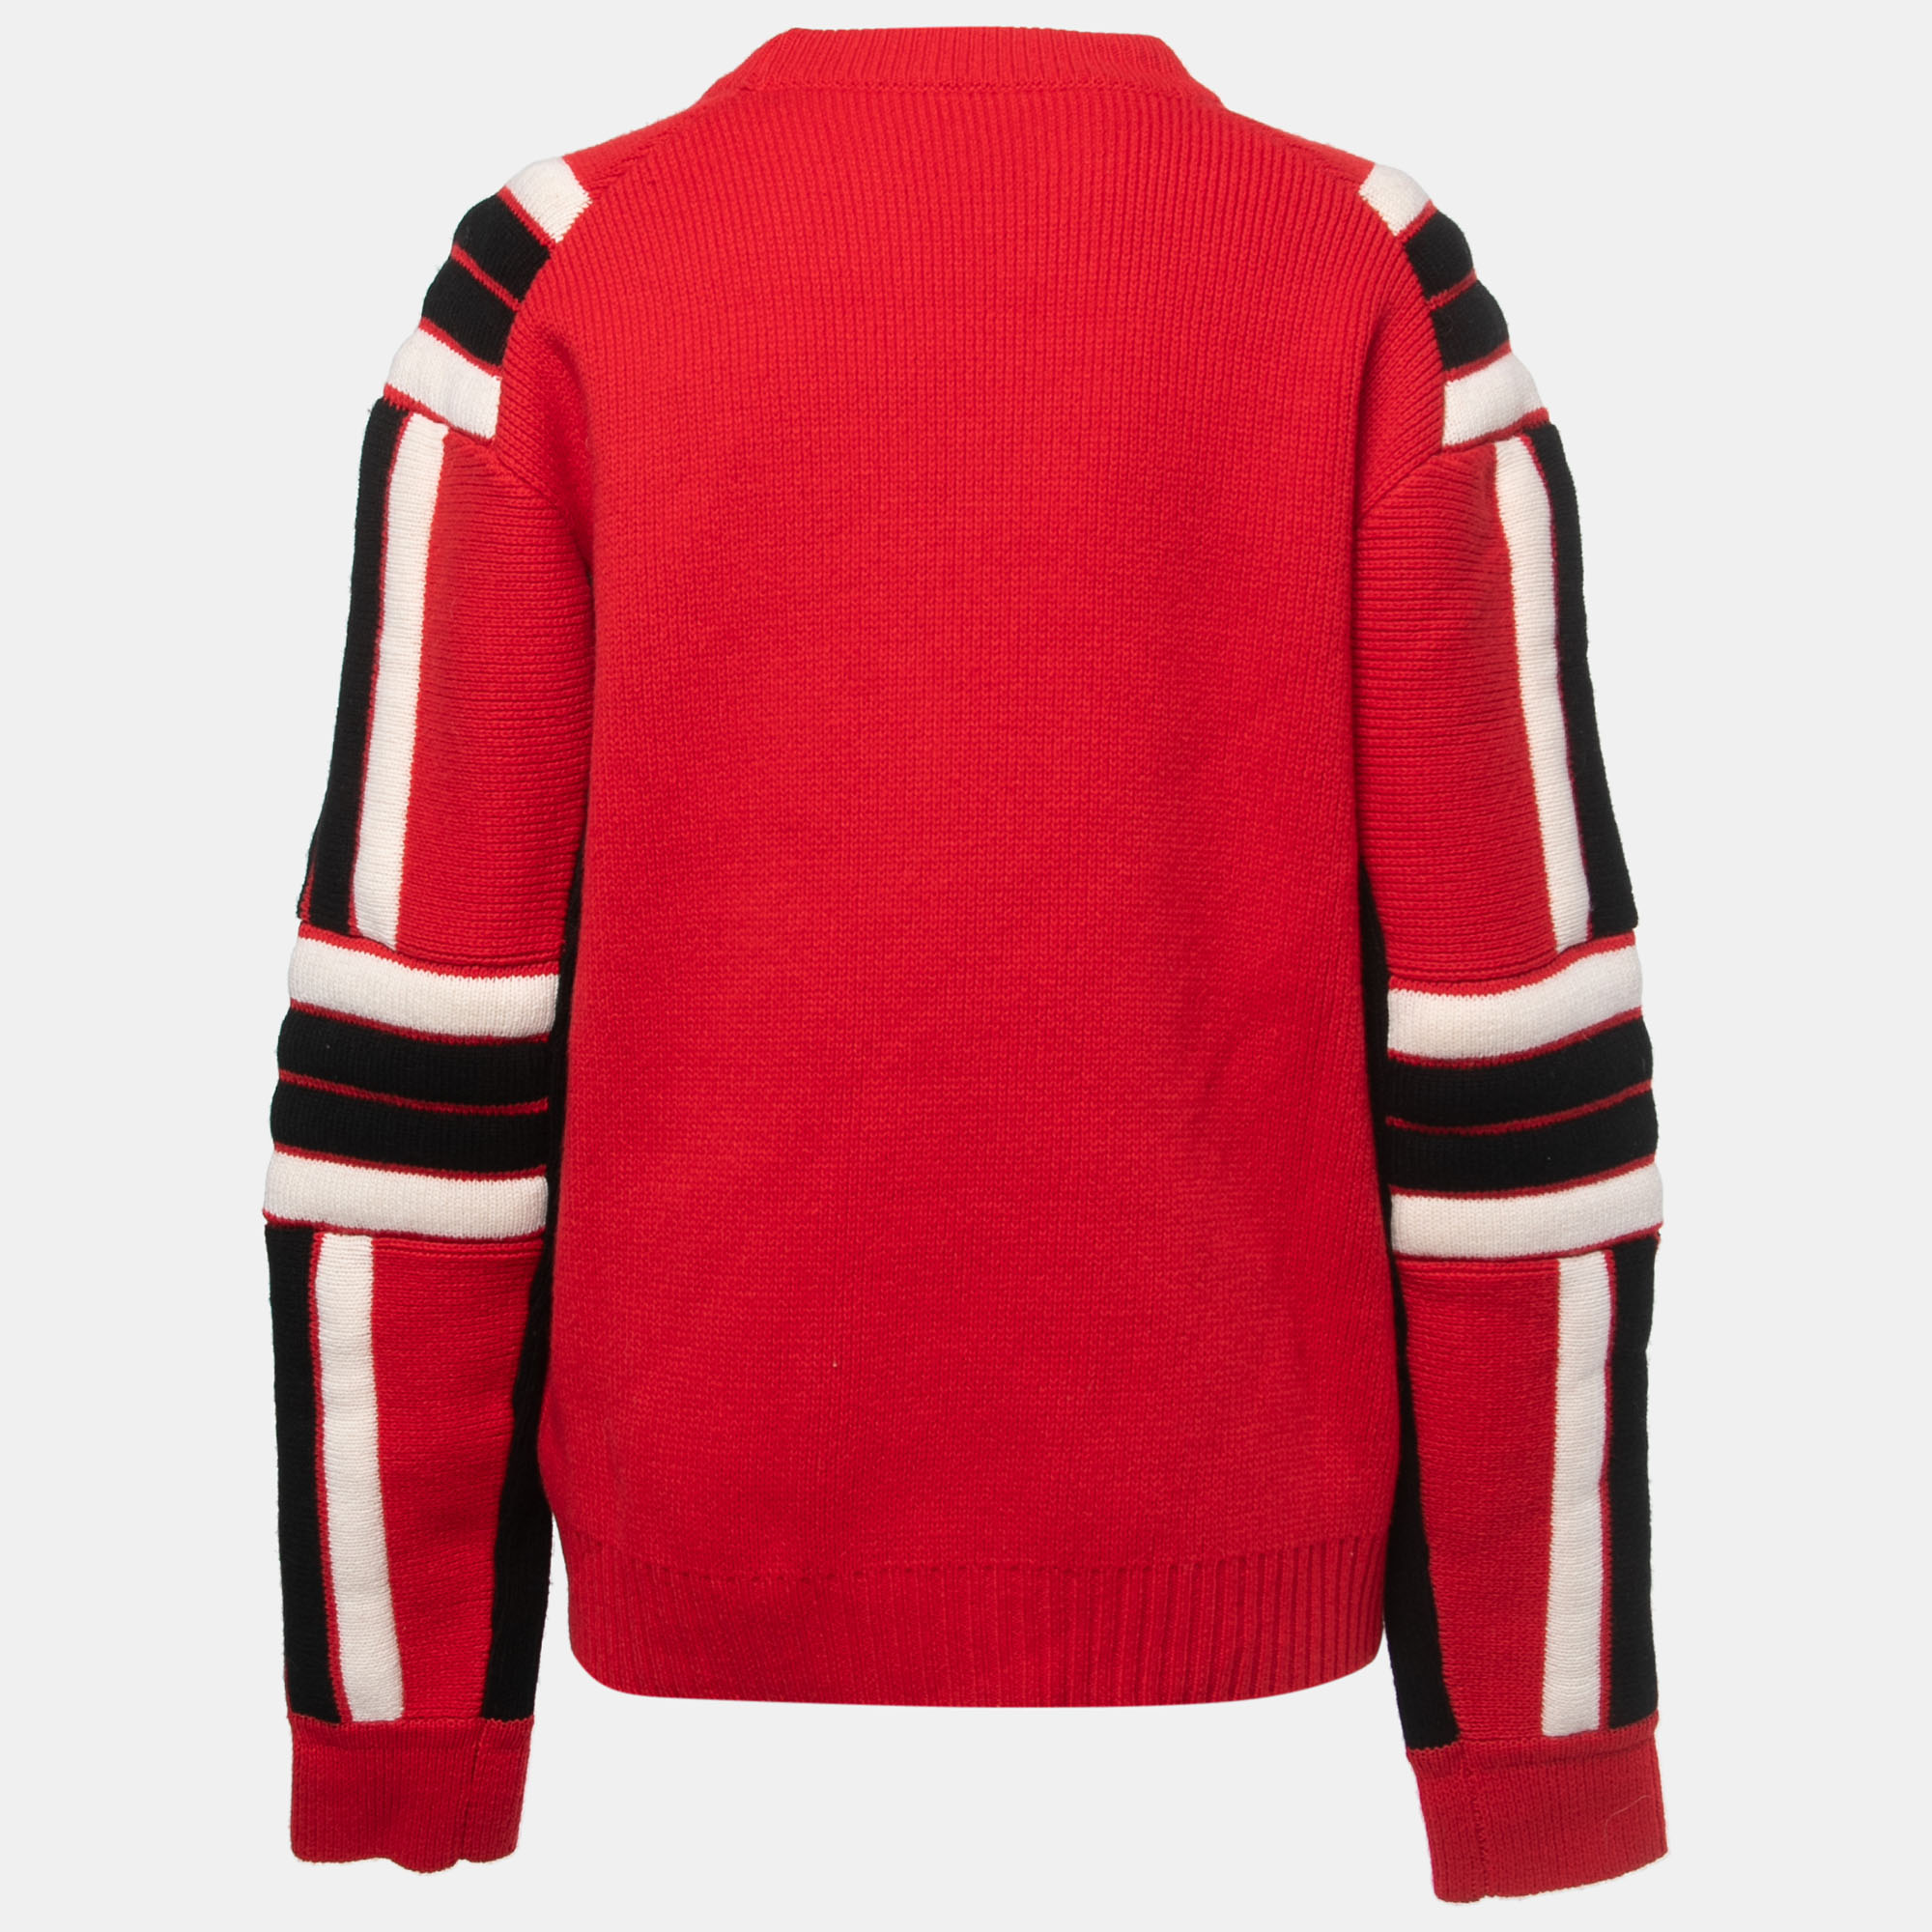 

Zadig & Voltaire Red Patterned Wool Knit Crew Neck Sweater